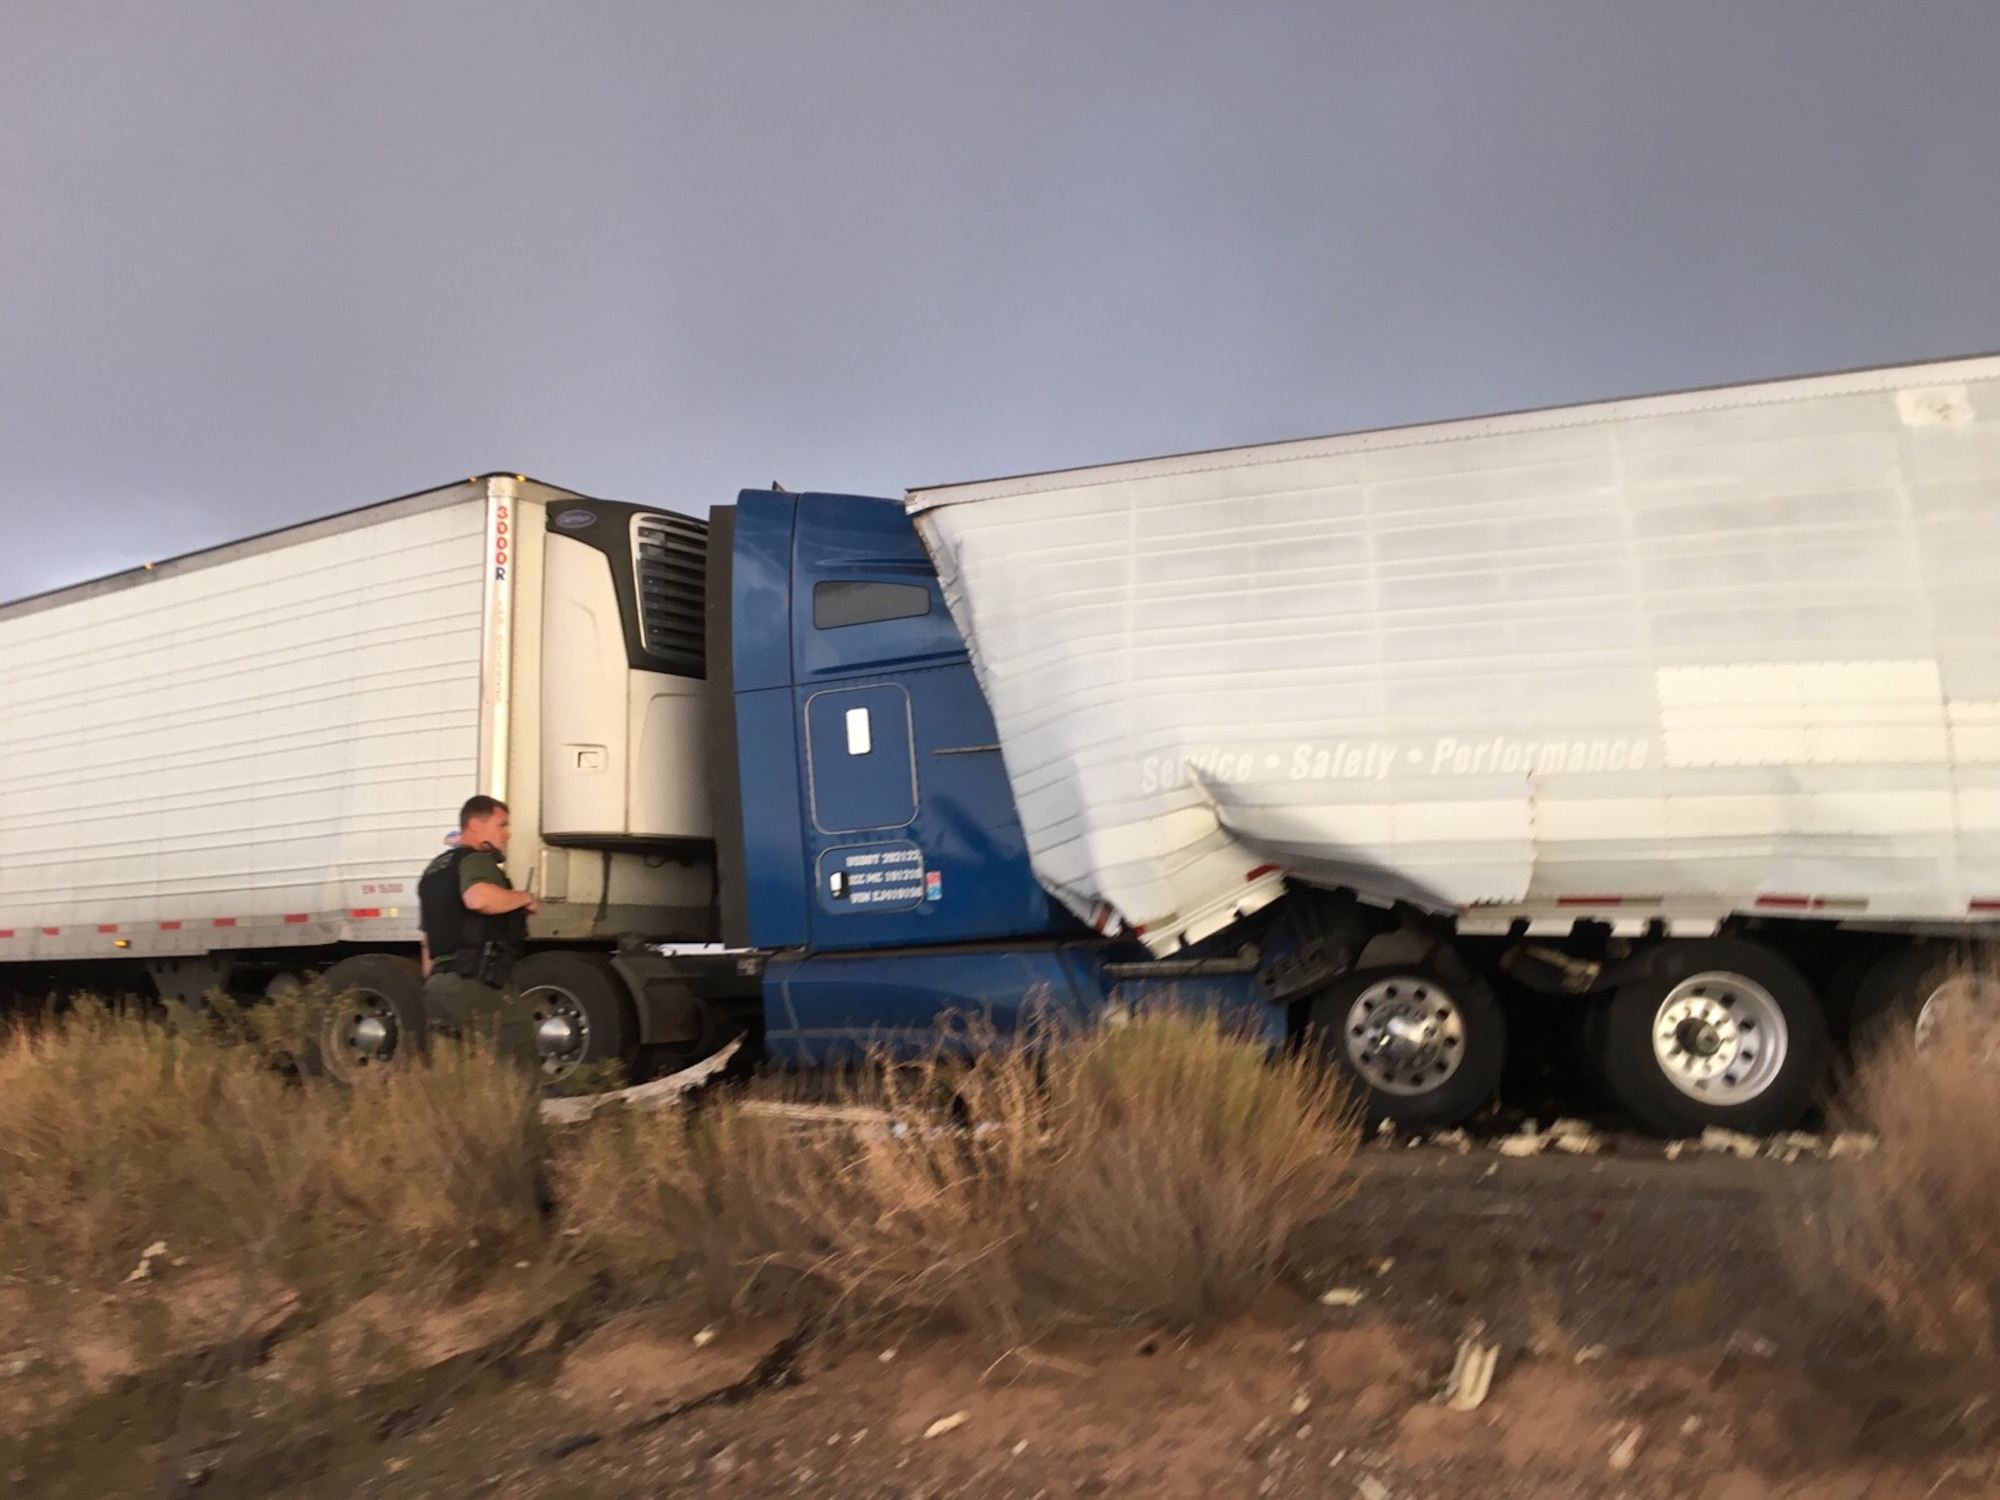 Two semitractor-trailers sit on the roadside after a sandstorm on Interstate 8 in Arizona, July 19, 2016. U.S. Air Force Staff Sgt. Eric Fullmer, 563rd Operations Support Squadron loadmaster, and Senior Airman Shane Hardin, 563rd OSS aerial delivery journeyman, assisted motorists injured in a pile up created by the sandstorm. (Courtesy photo)